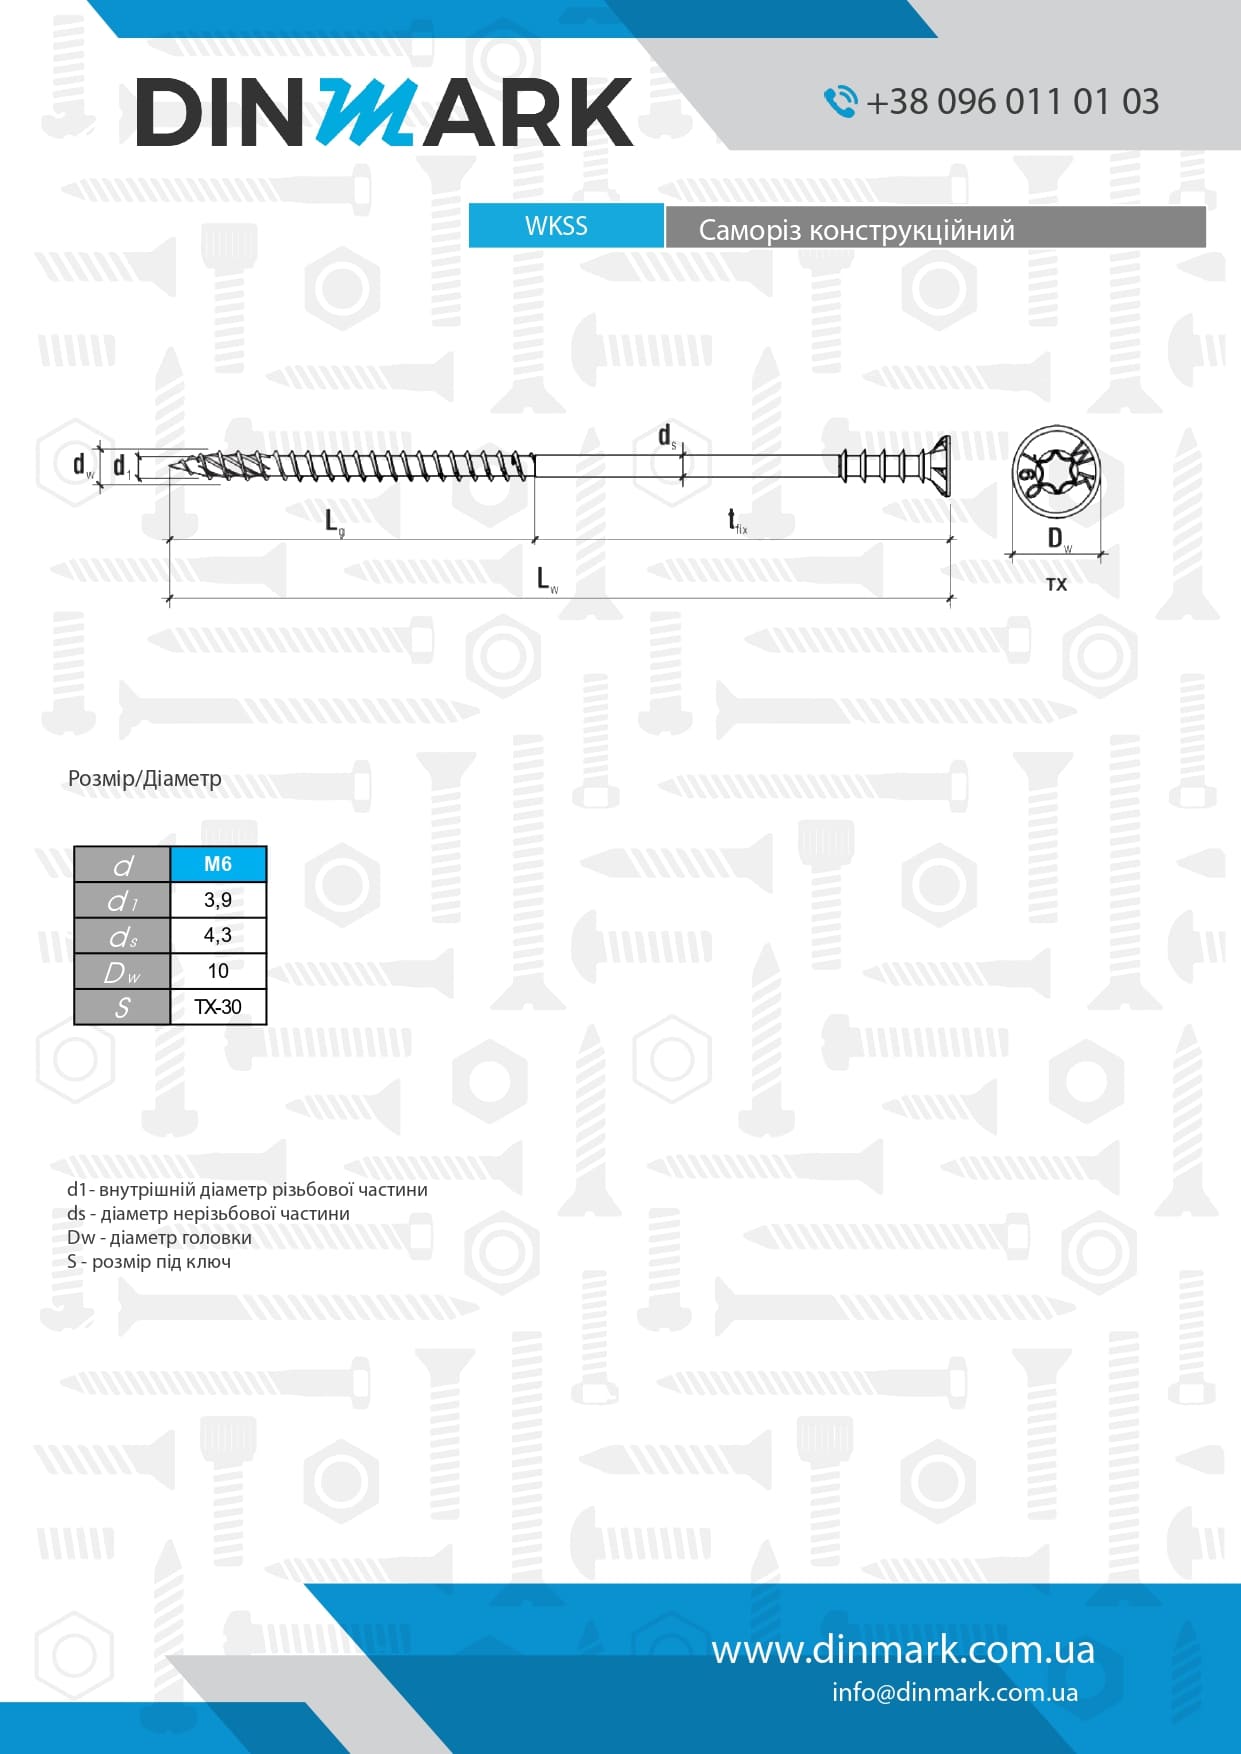 WKSS zinc Self-tapping screw with countersunk head for leveling Wkret-Met structural battens pdf